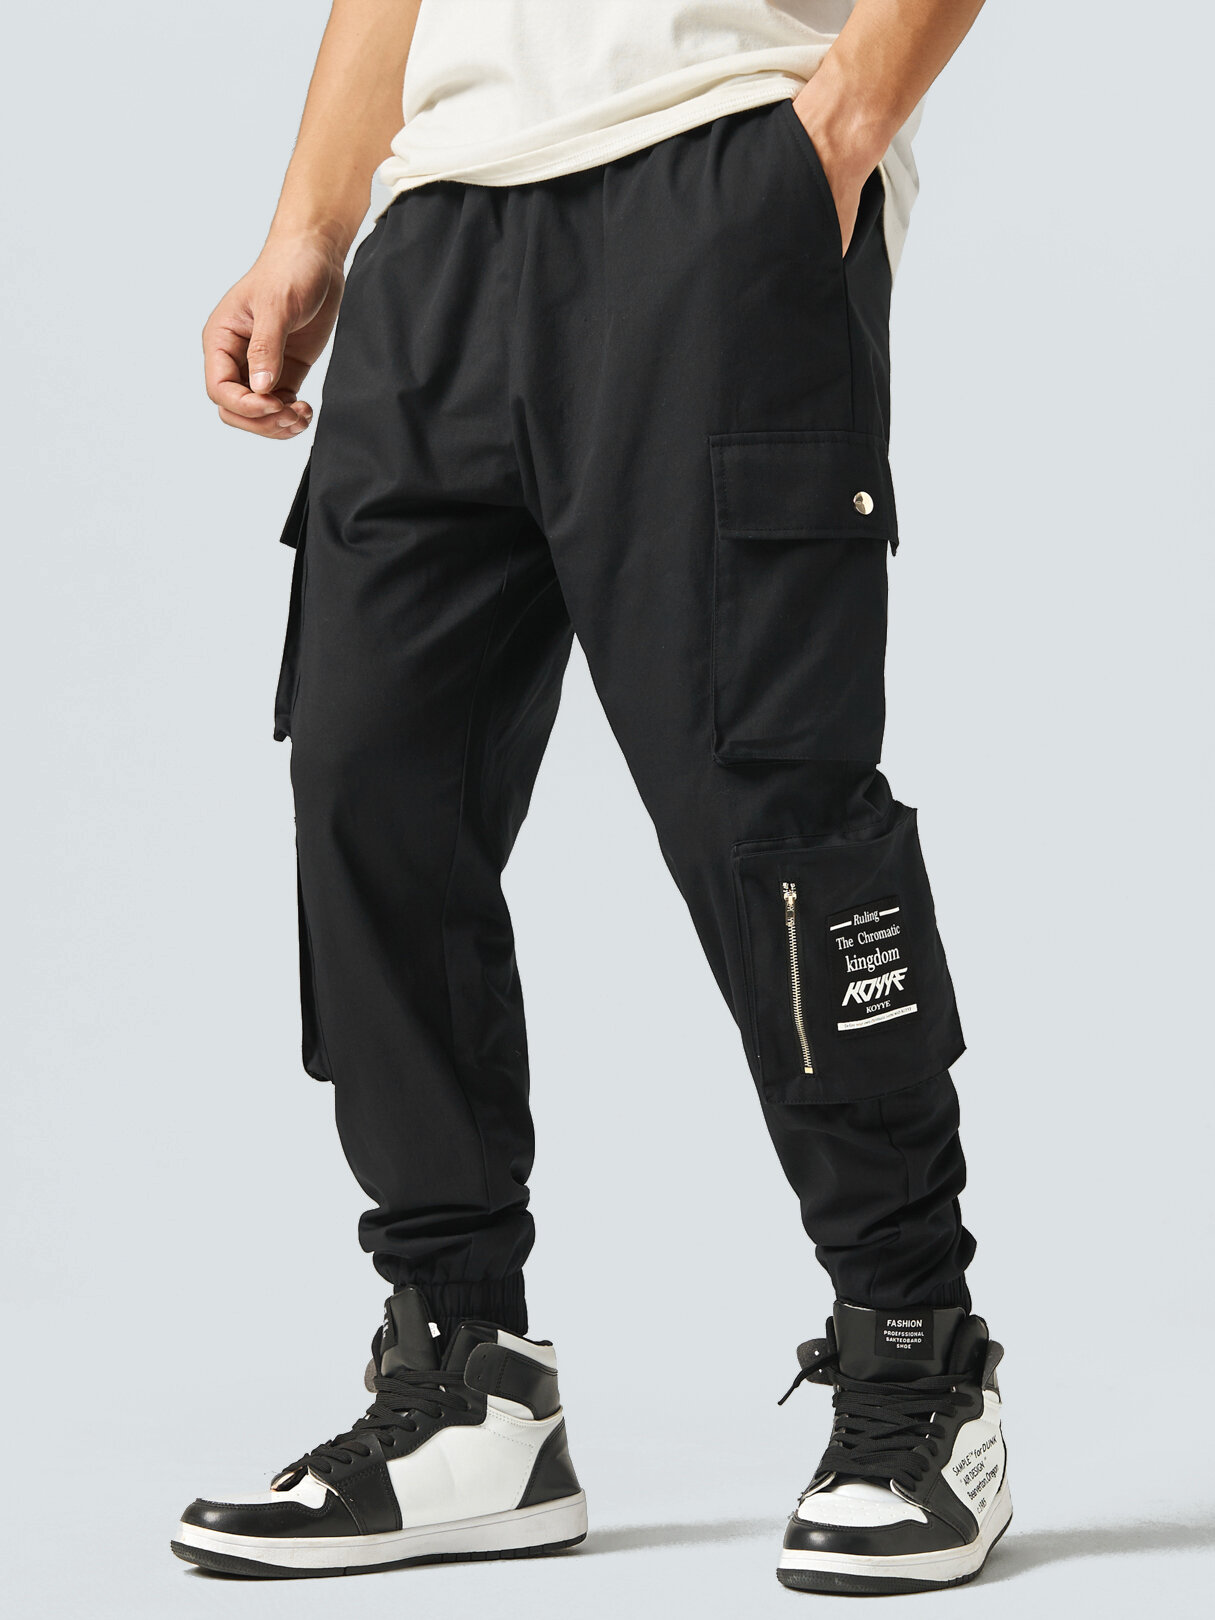 Mens Solid Color Multi Pocket Street Cuffed Cargo Pants